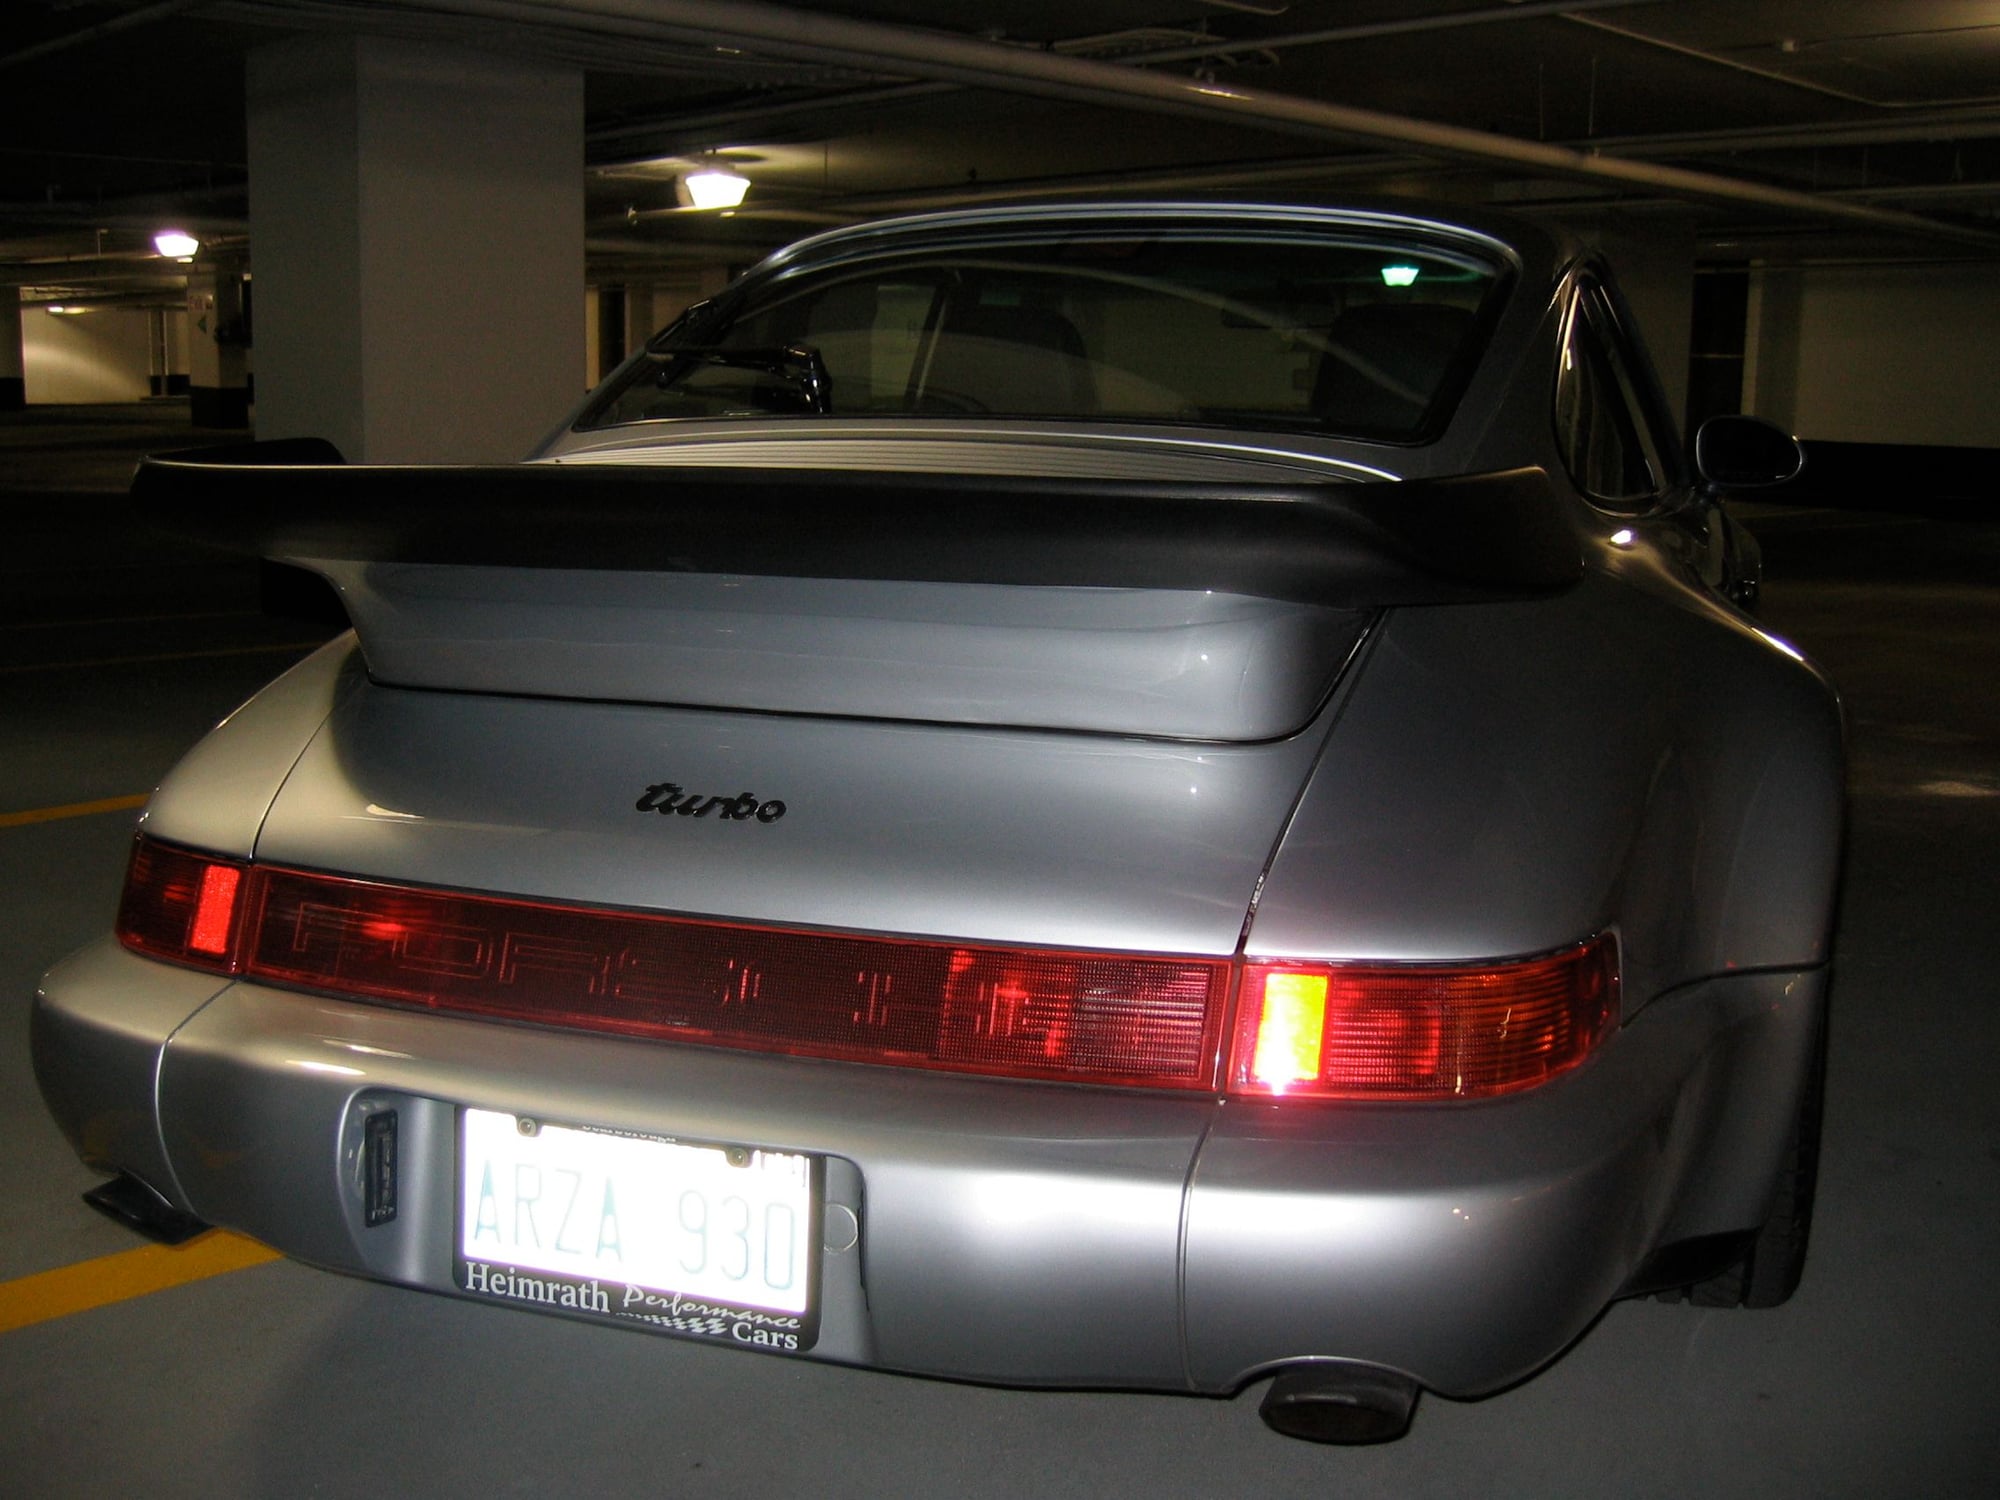 1991 Porsche 911 - 1991 911 Turbo for sale - Used - VIN WP0AA2962MS480332 - 53,000 Miles - 6 cyl - 2WD - Manual - Coupe - Silver - Toronto, ON M1M1J9, Canada